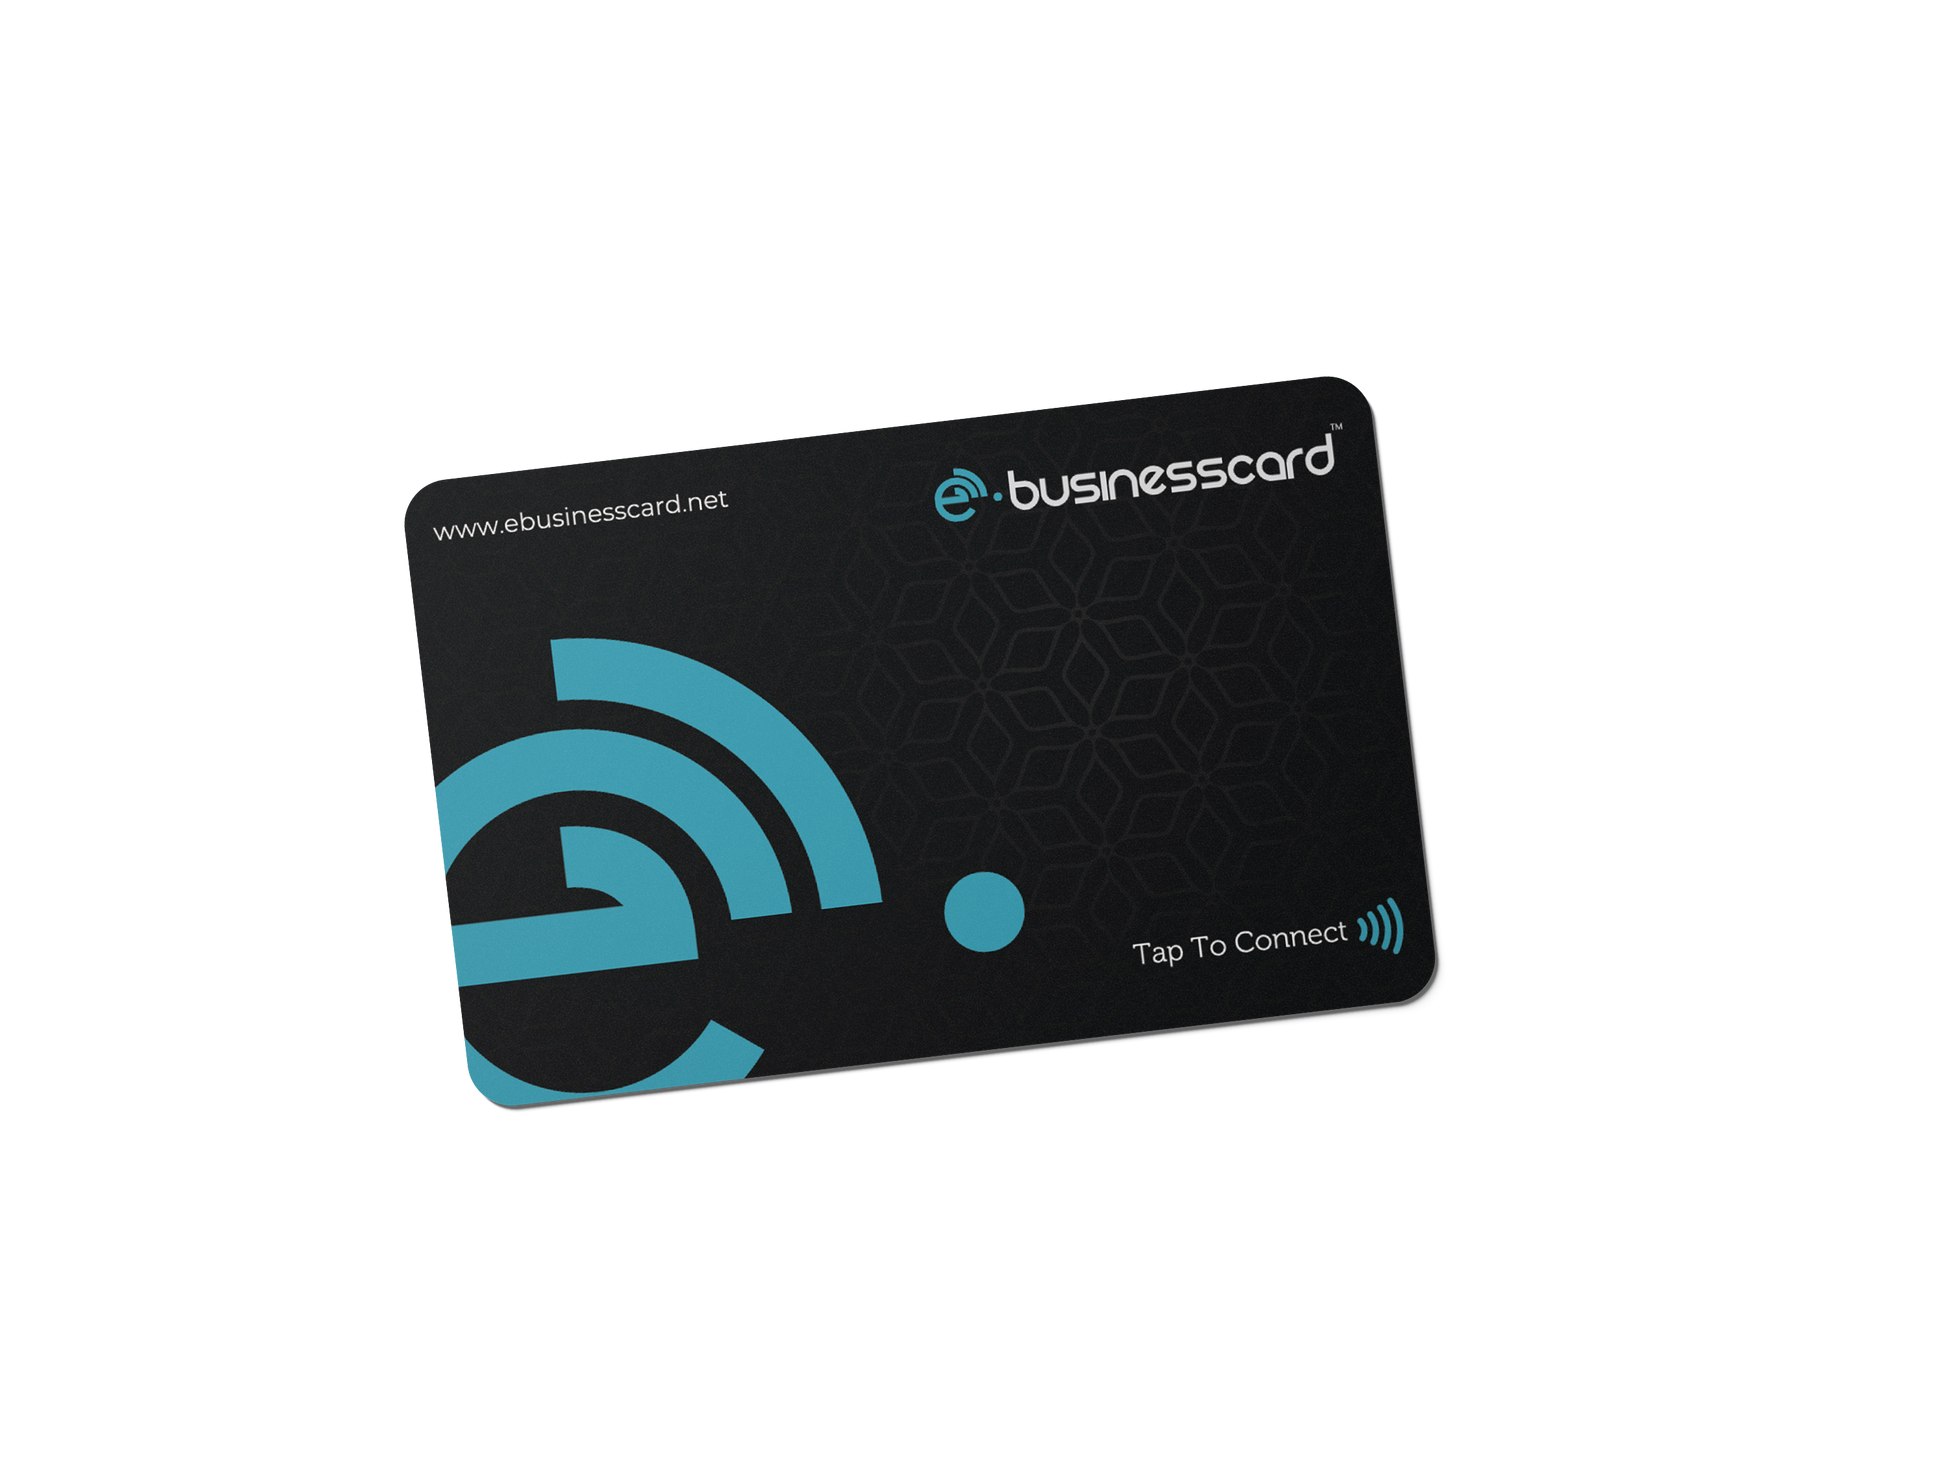 Personalised NFC Business Card - eBusinesscard